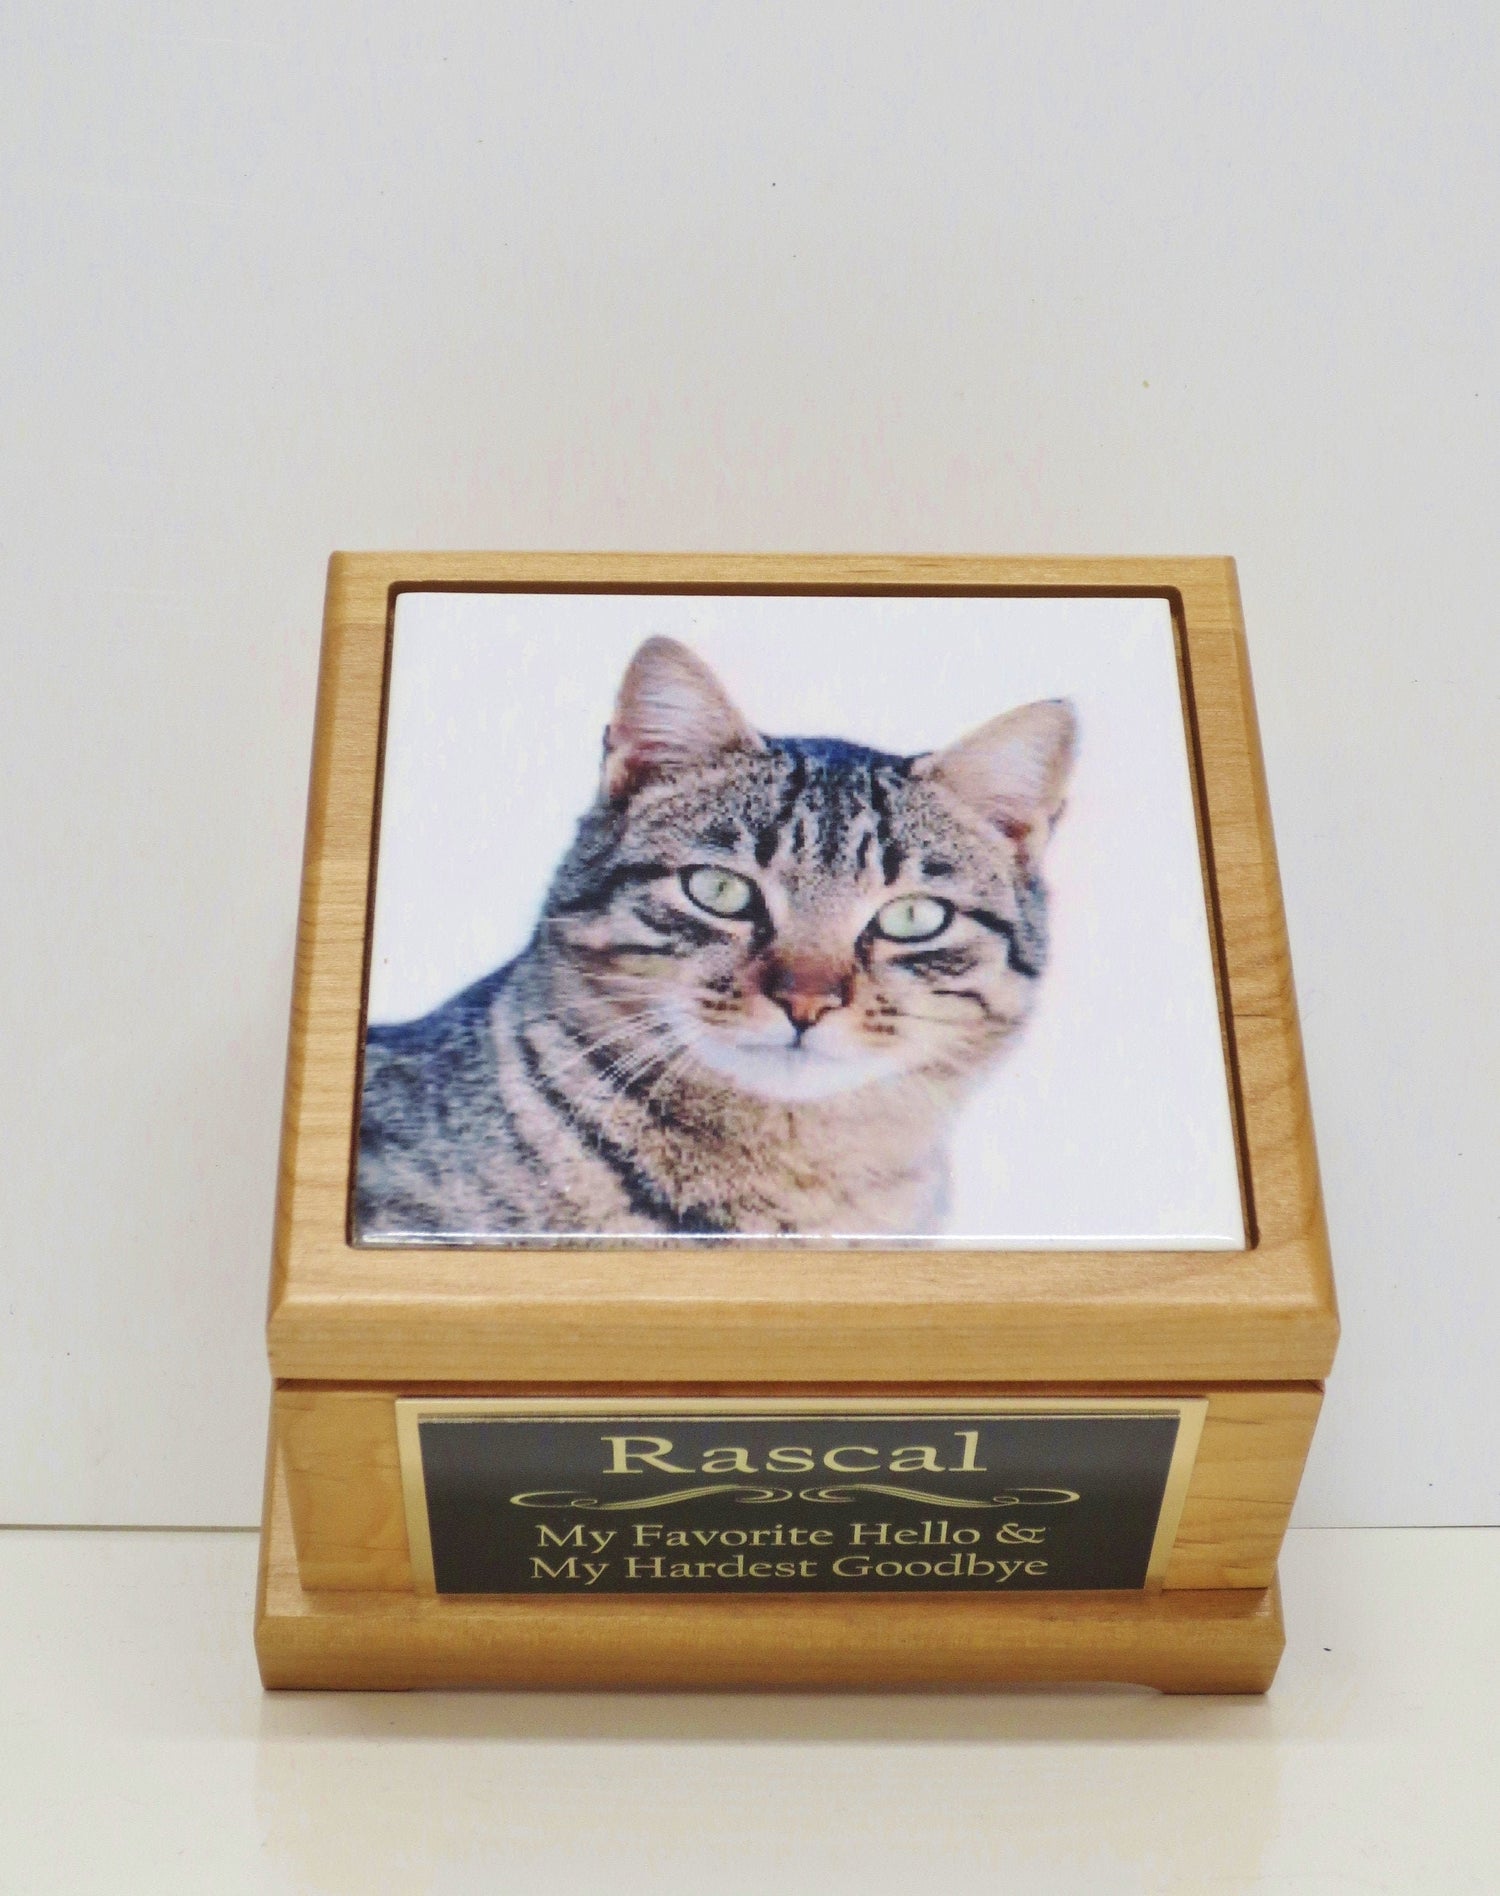 Memorial Pet Urn Cat Cremation Urn with Custom Photo & Engraving Pet Memorial Keepsake Cremation Urn Kitty or Small Animal Personalized